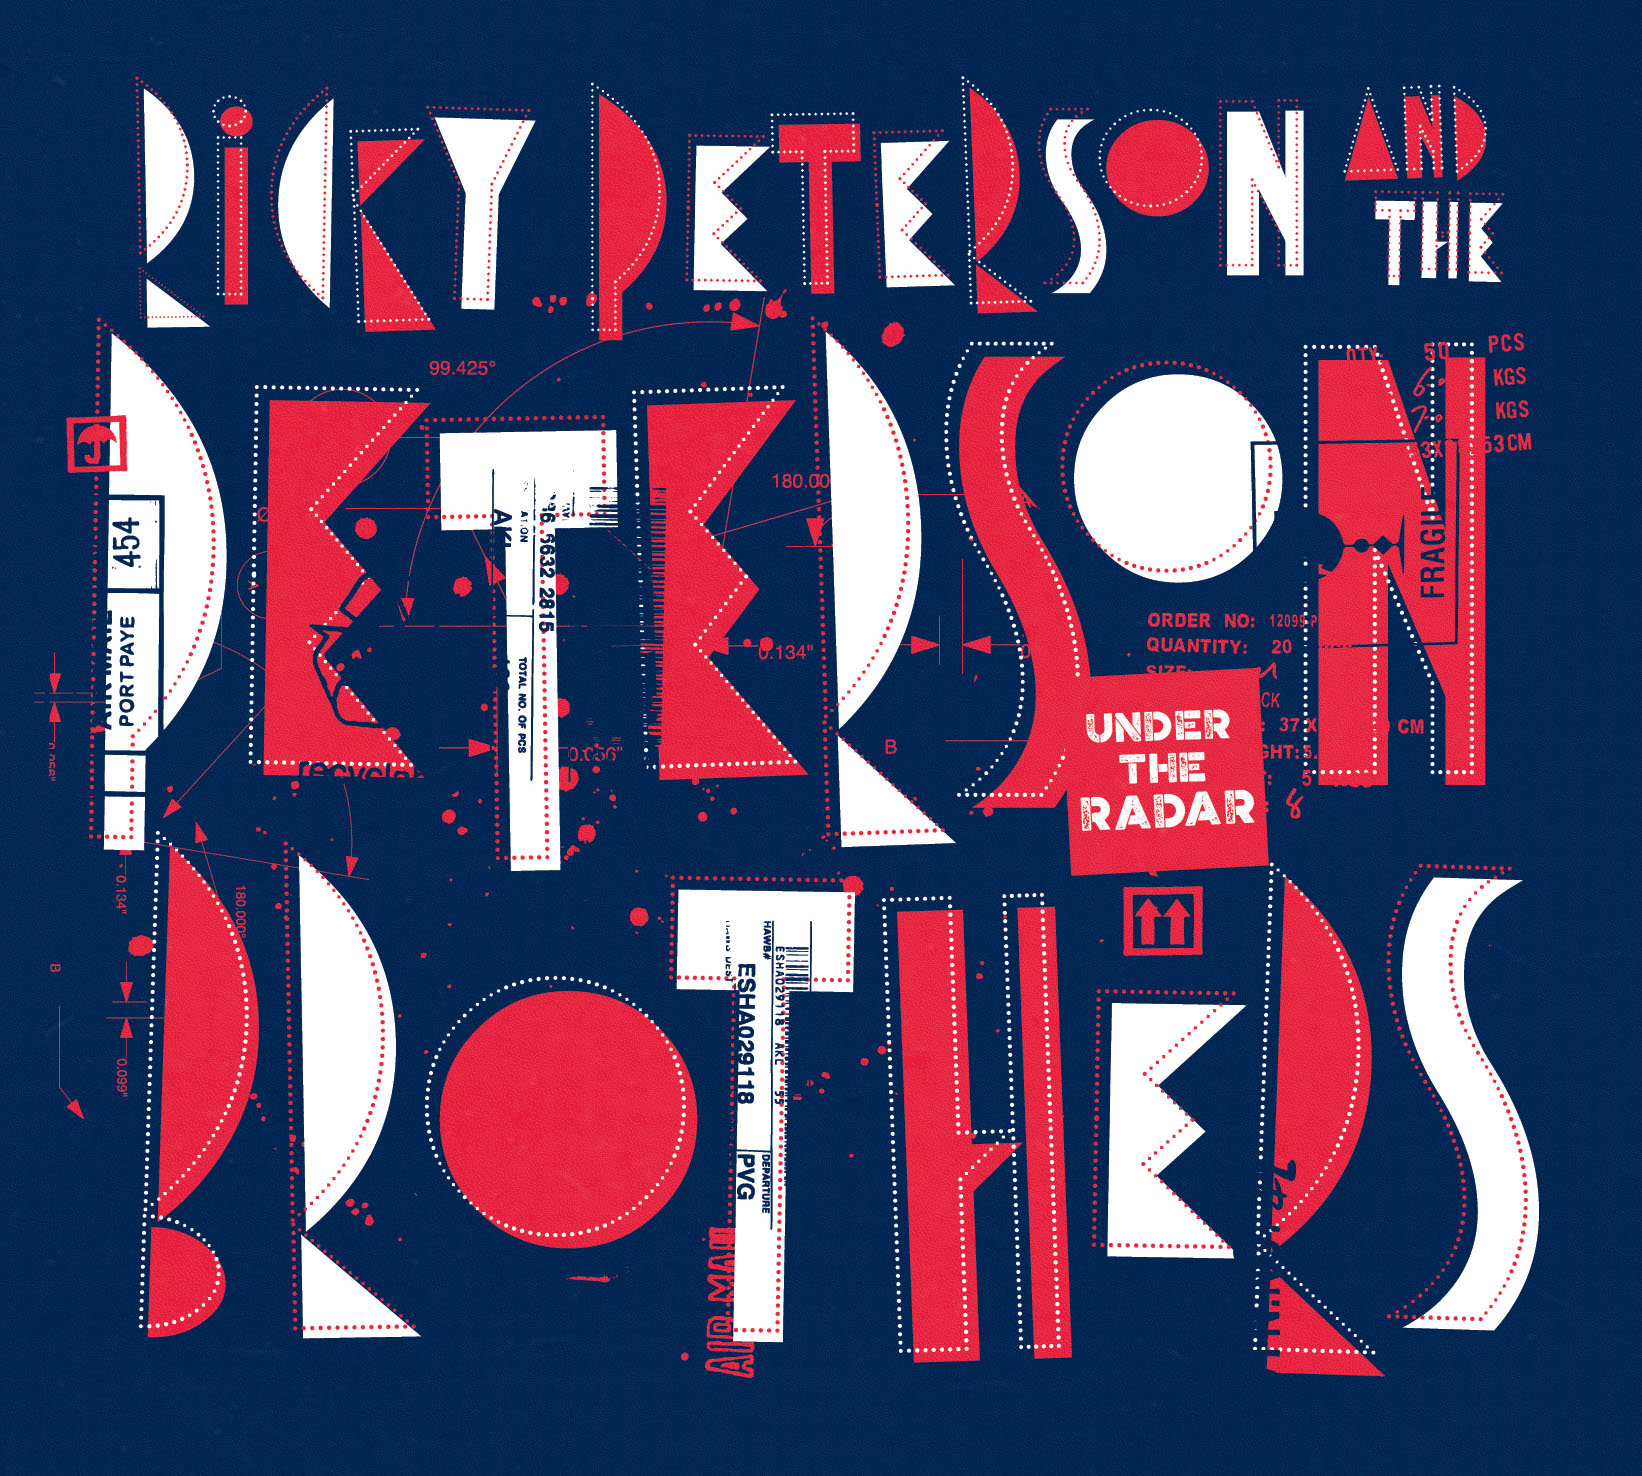 D77079 PETERSON BROS cover